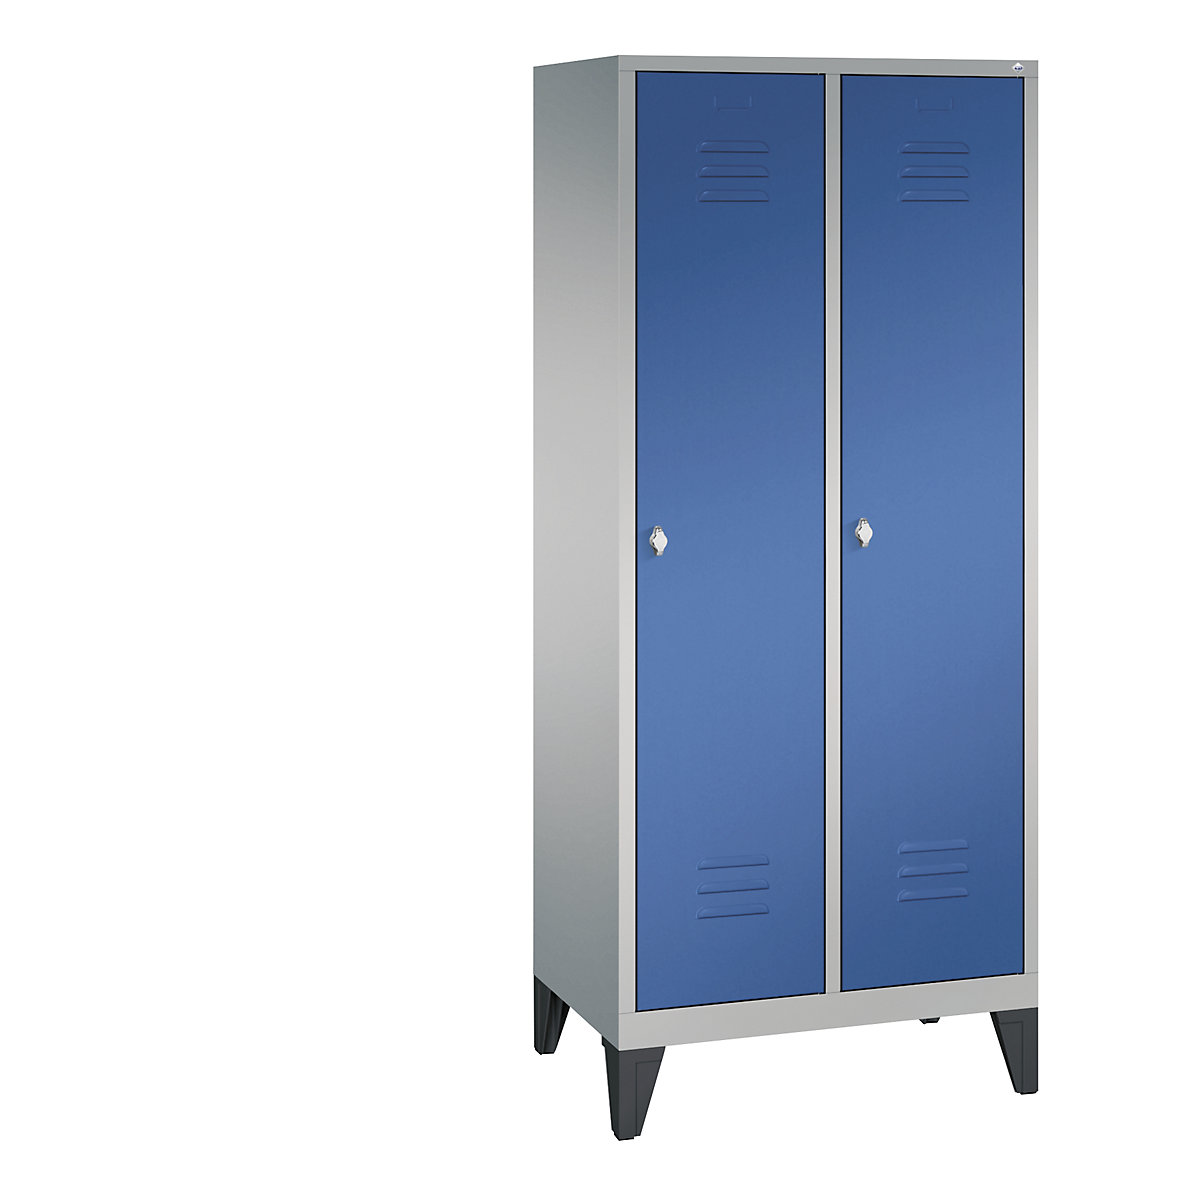 CLASSIC cloakroom locker with feet – C+P, 2 compartments, compartment width 400 mm, white aluminium / gentian blue-9